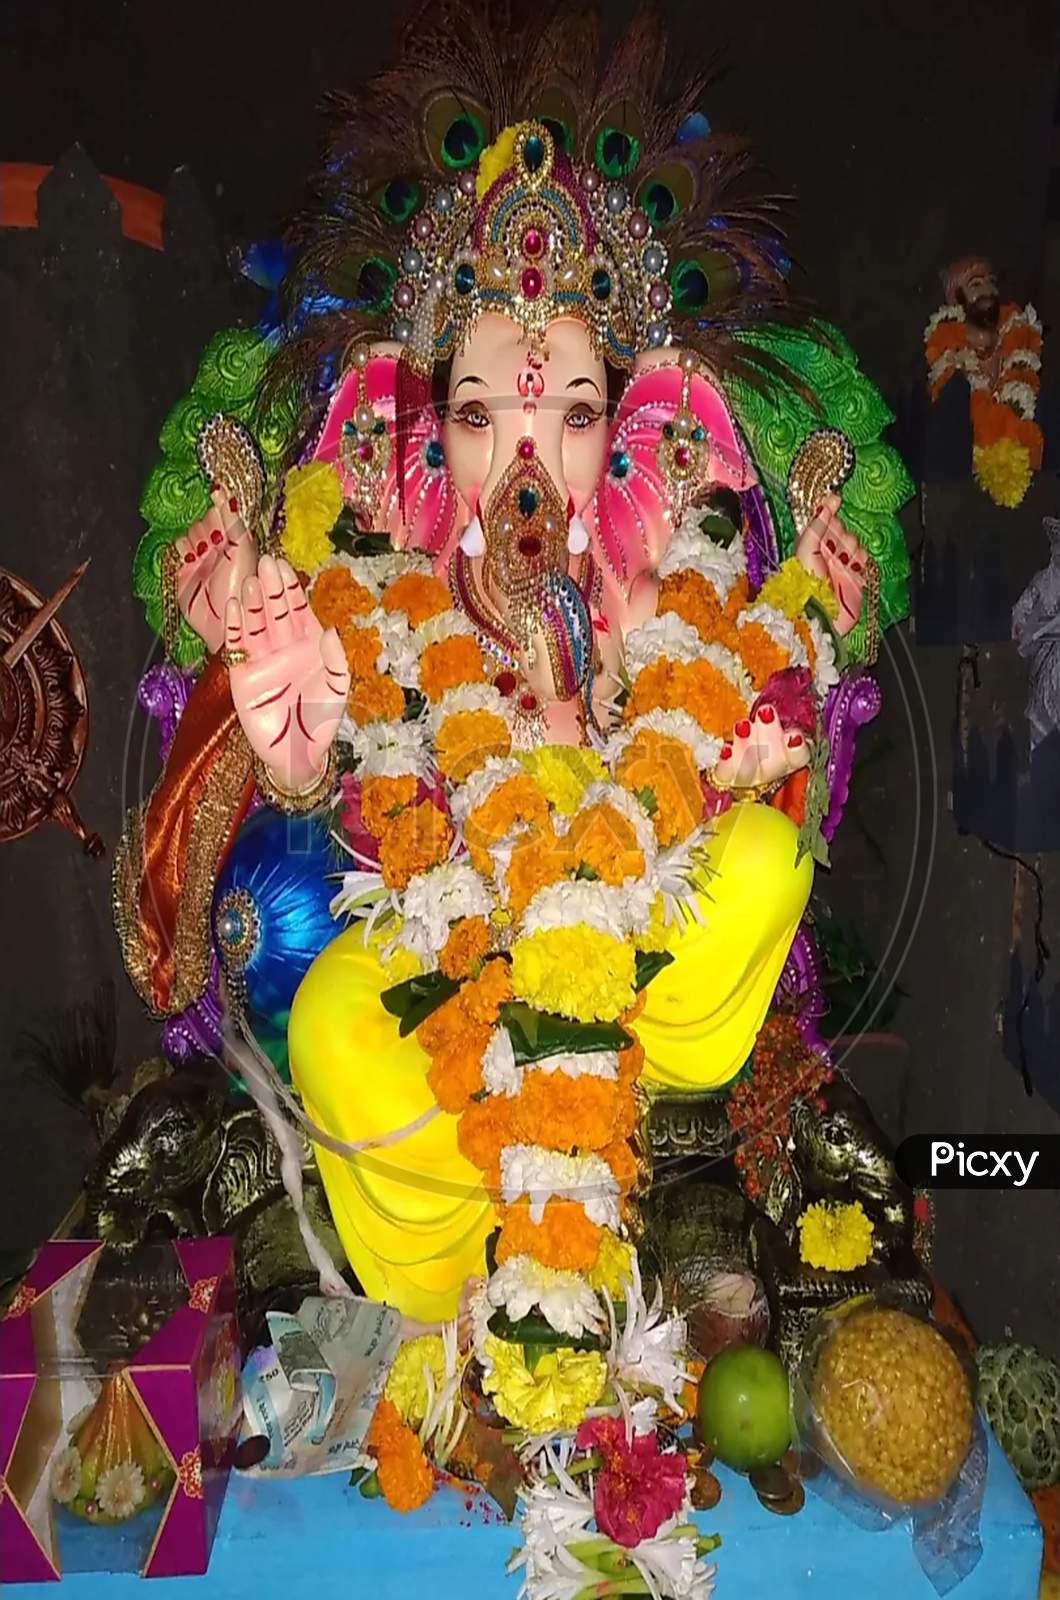 This is a image of famous Indian god Ganesha